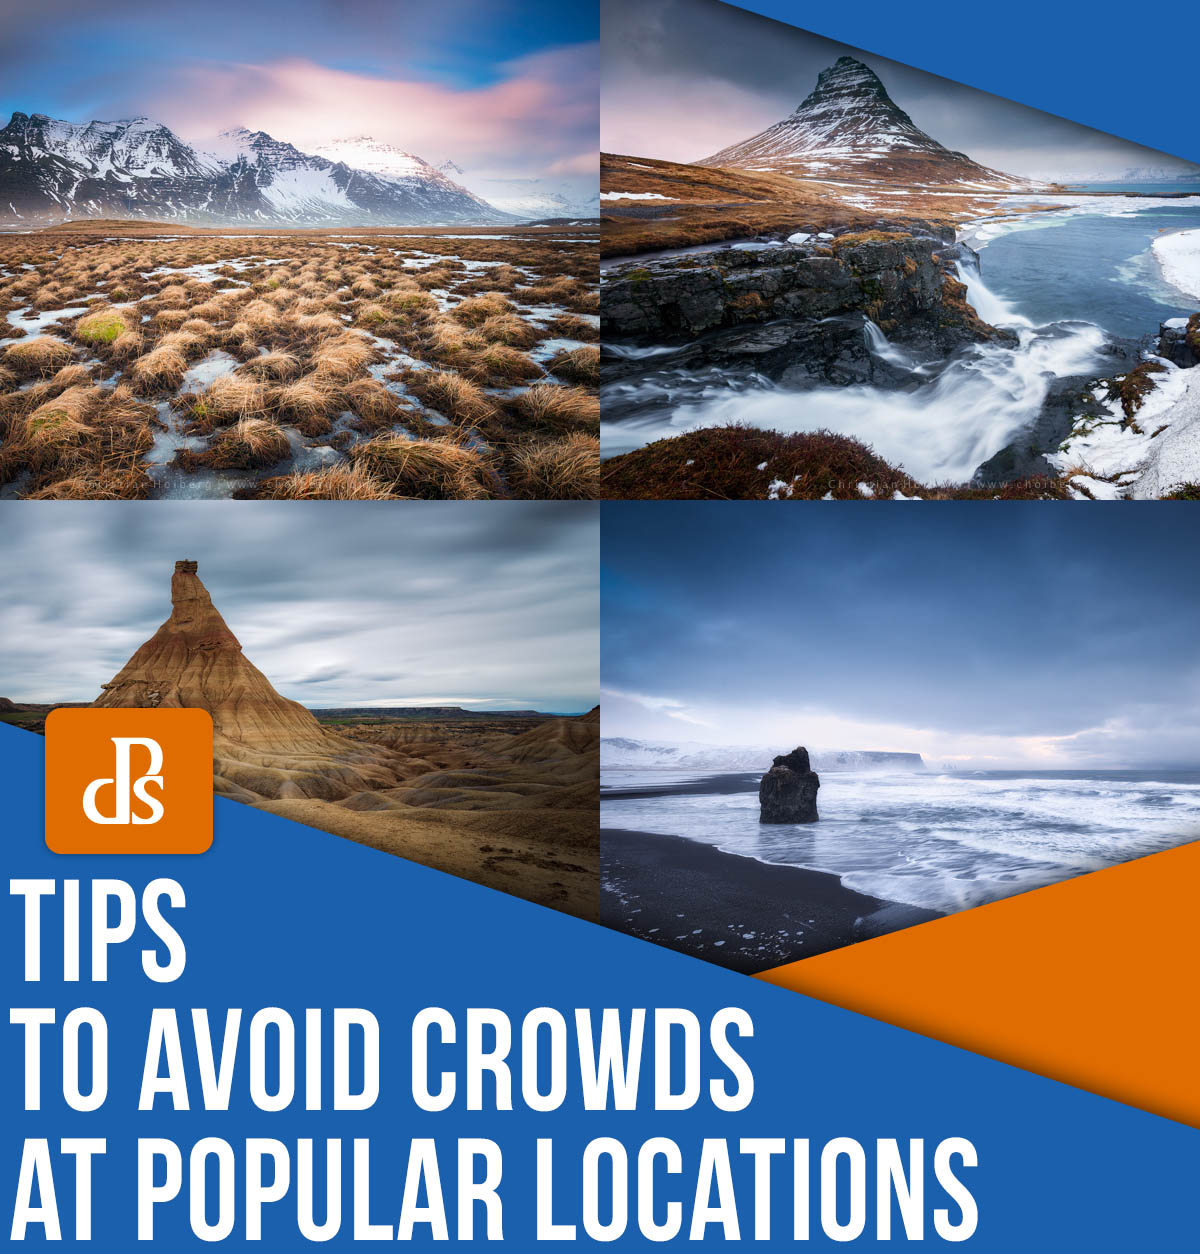 Tips to avoid crowds at popular locations